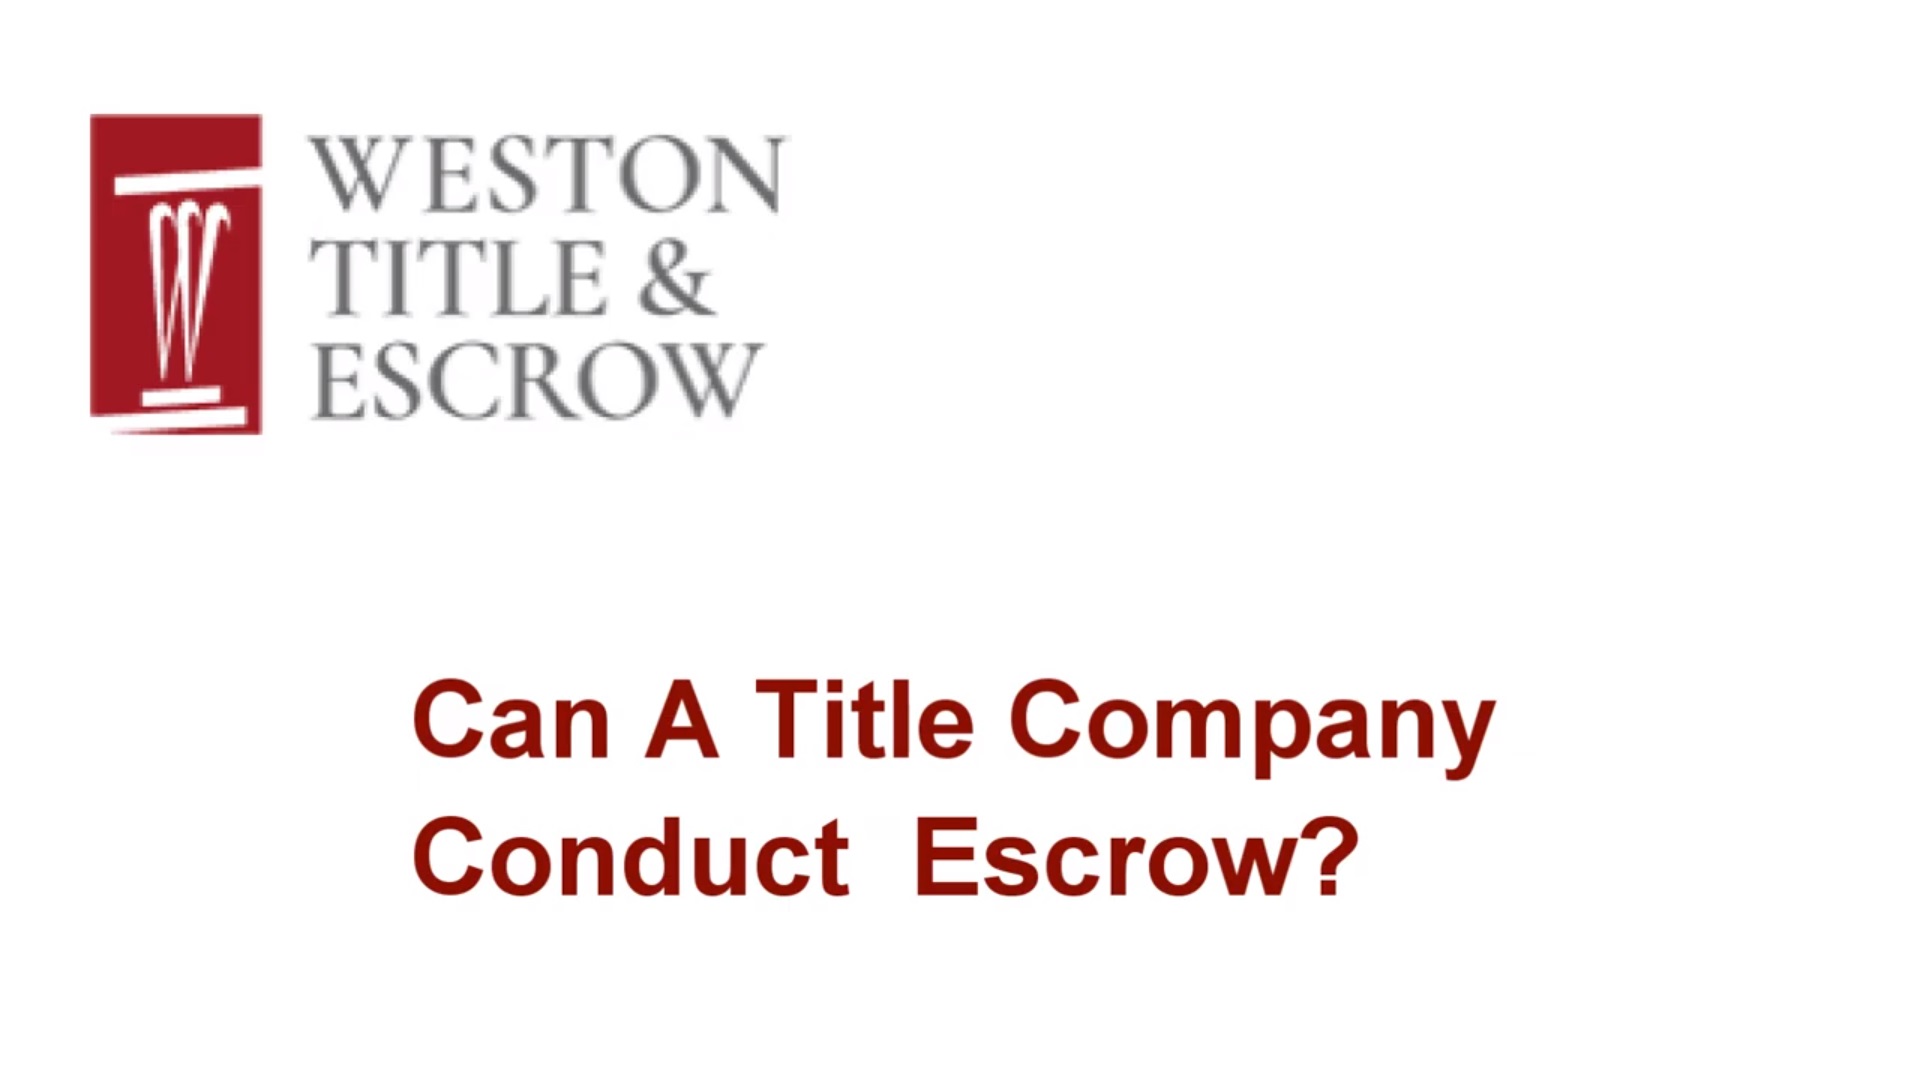 Can A Title Company Conduct Escrow?